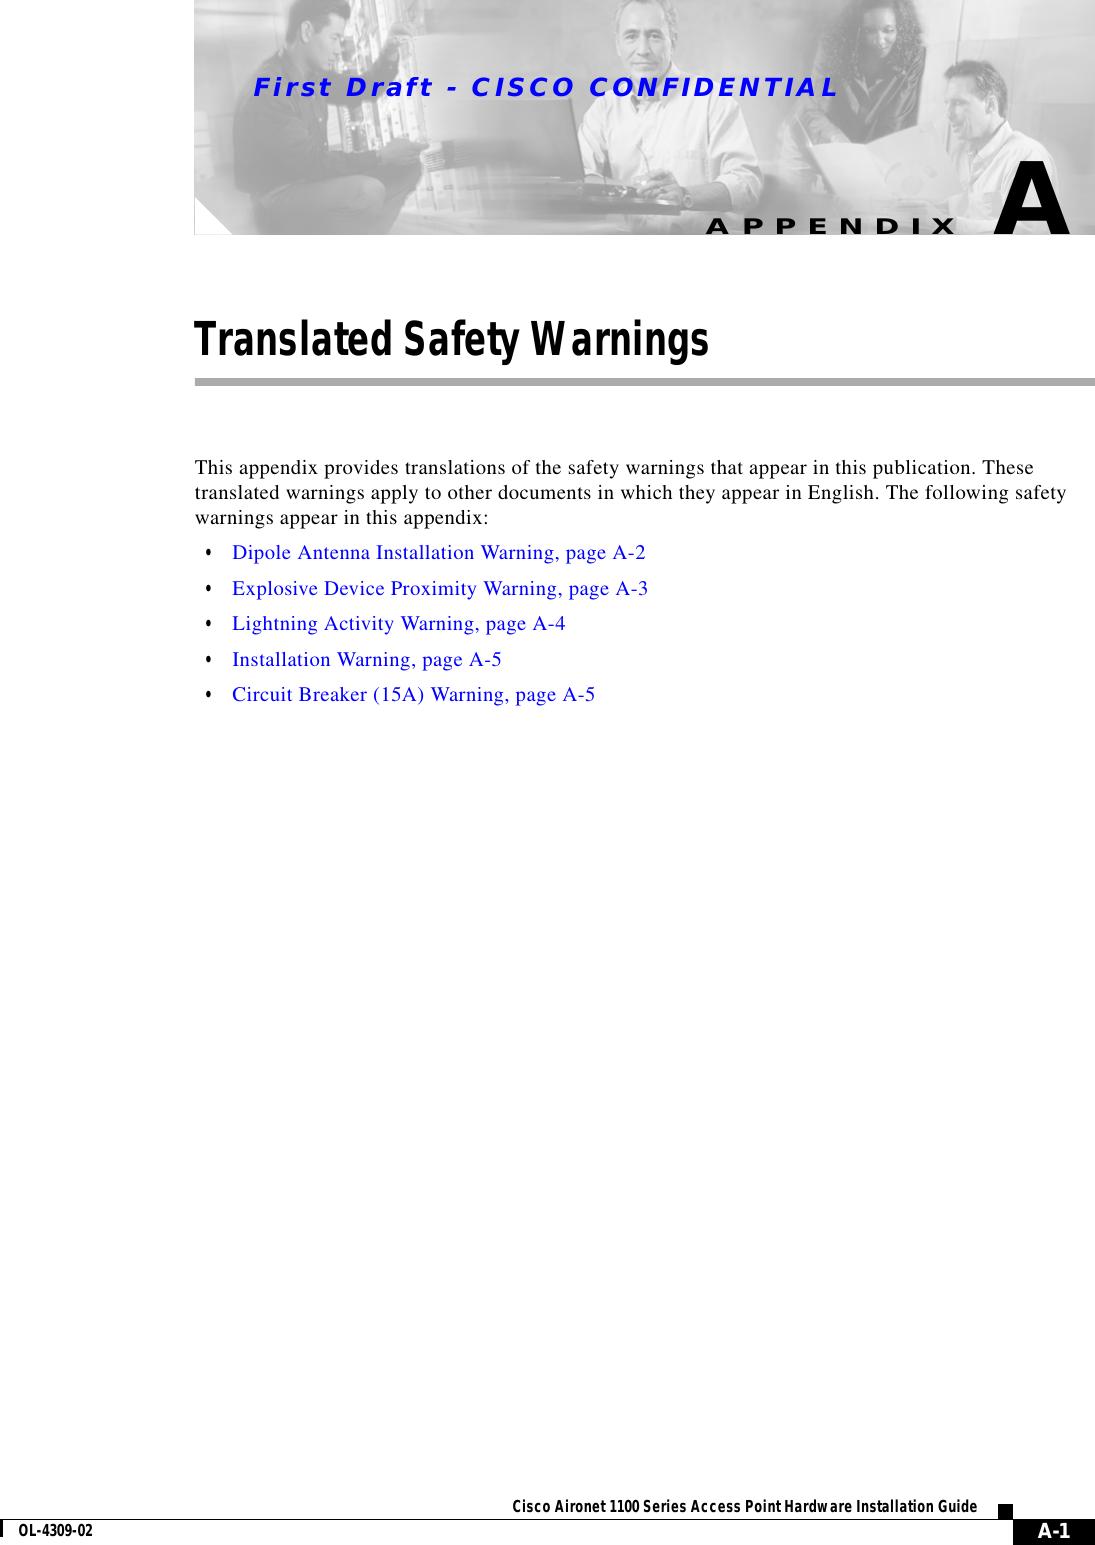 First Draft - CISCO CONFIDENTIALA-1Cisco Aironet 1100 Series Access Point Hardware Installation GuideOL-4309-02APPENDIXATranslated Safety WarningsThis appendix provides translations of the safety warnings that appear in this publication. These translated warnings apply to other documents in which they appear in English. The following safety warnings appear in this appendix:•Dipole Antenna Installation Warning, page A-2•Explosive Device Proximity Warning, page A-3•Lightning Activity Warning, page A-4•Installation Warning, page A-5•Circuit Breaker (15A) Warning, page A-5